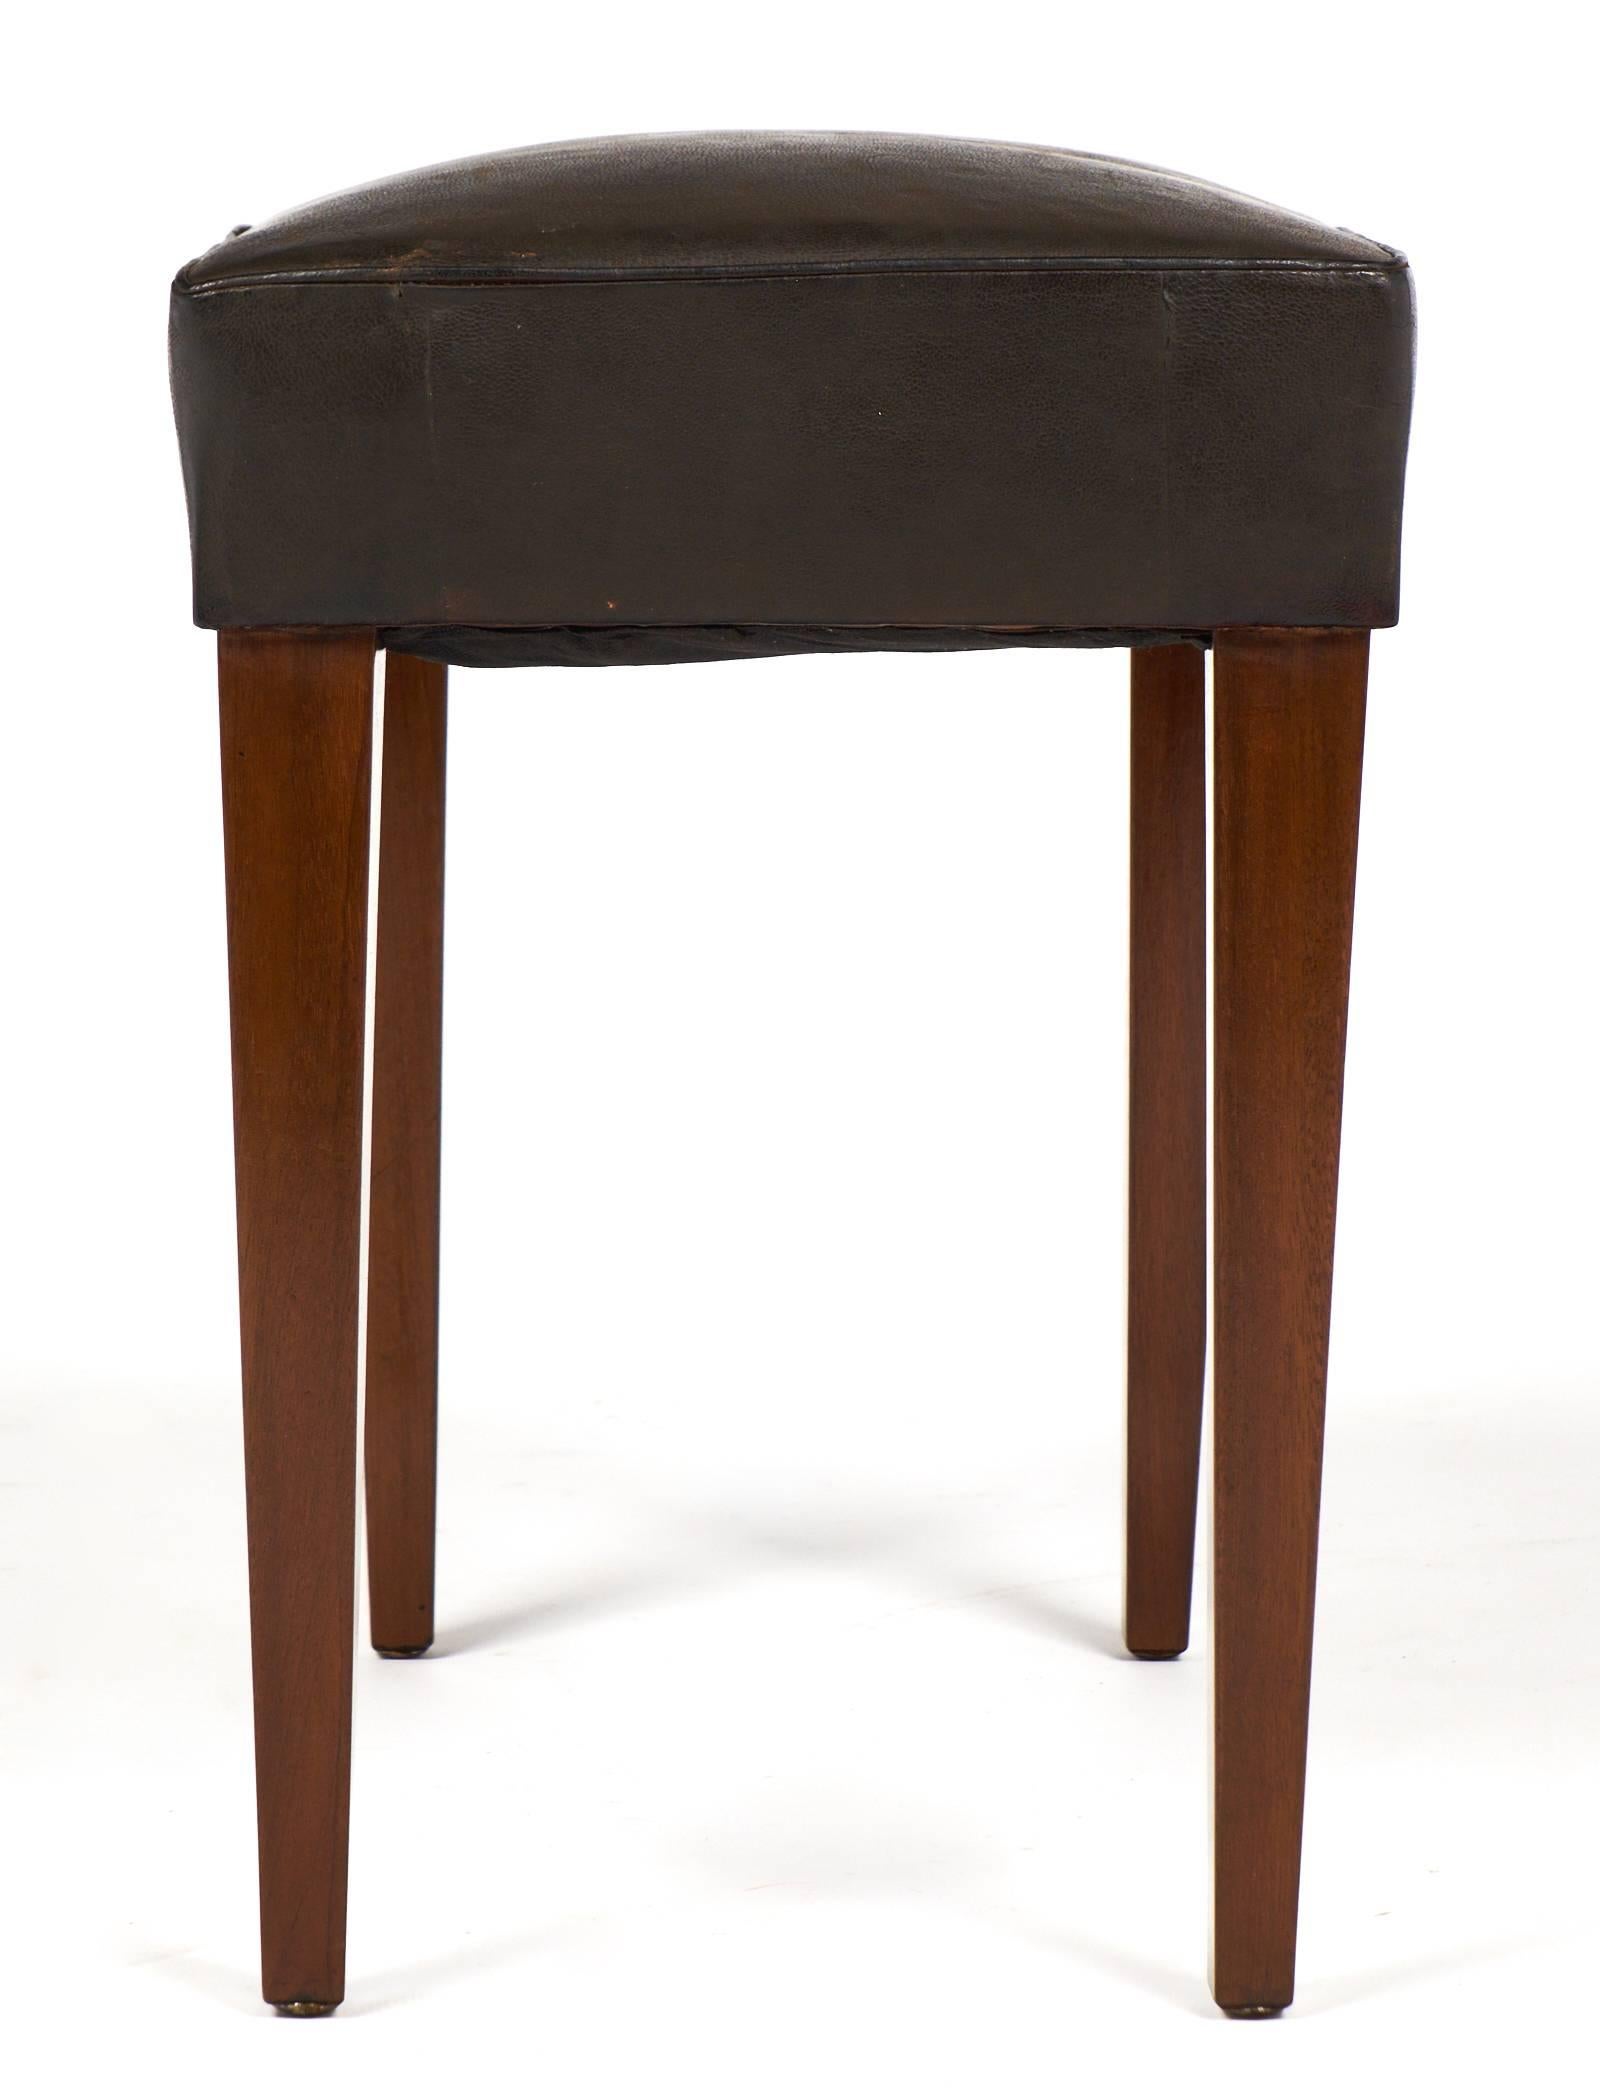 Mid-20th Century French Art Deco Leather Stool